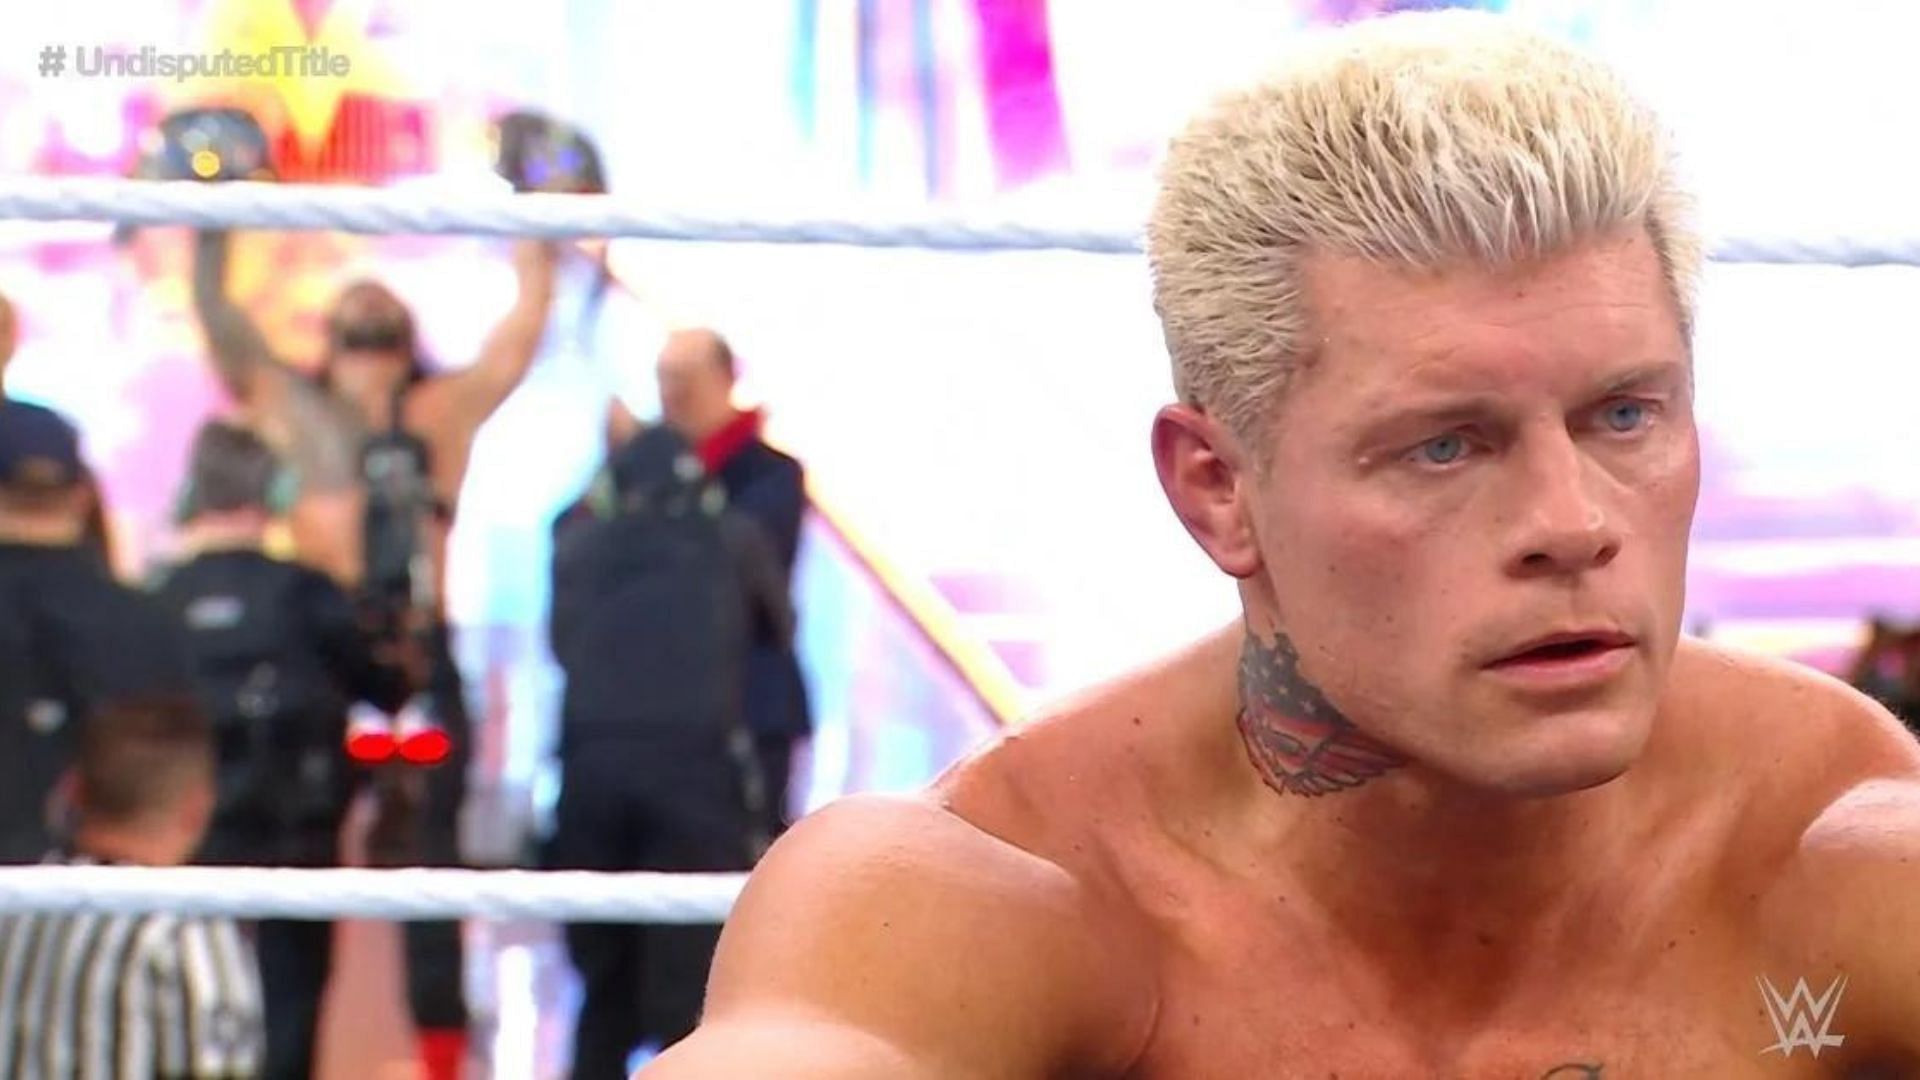 Cody Rhodes will be in action at Backlash